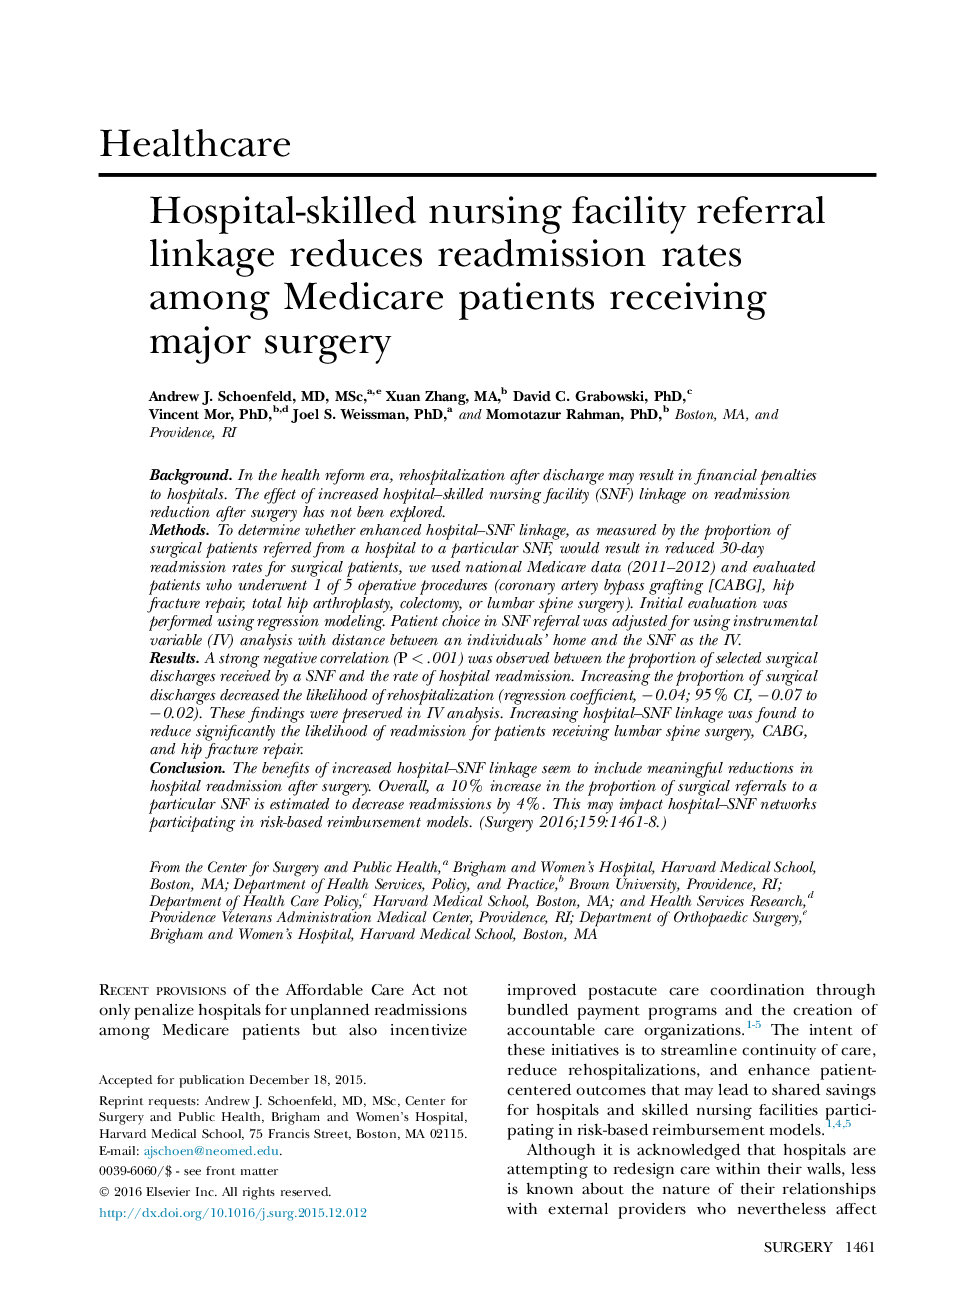 HealthcareHospital-skilled nursing facility referral linkage reduces readmission rates among Medicare patients receiving major surgery